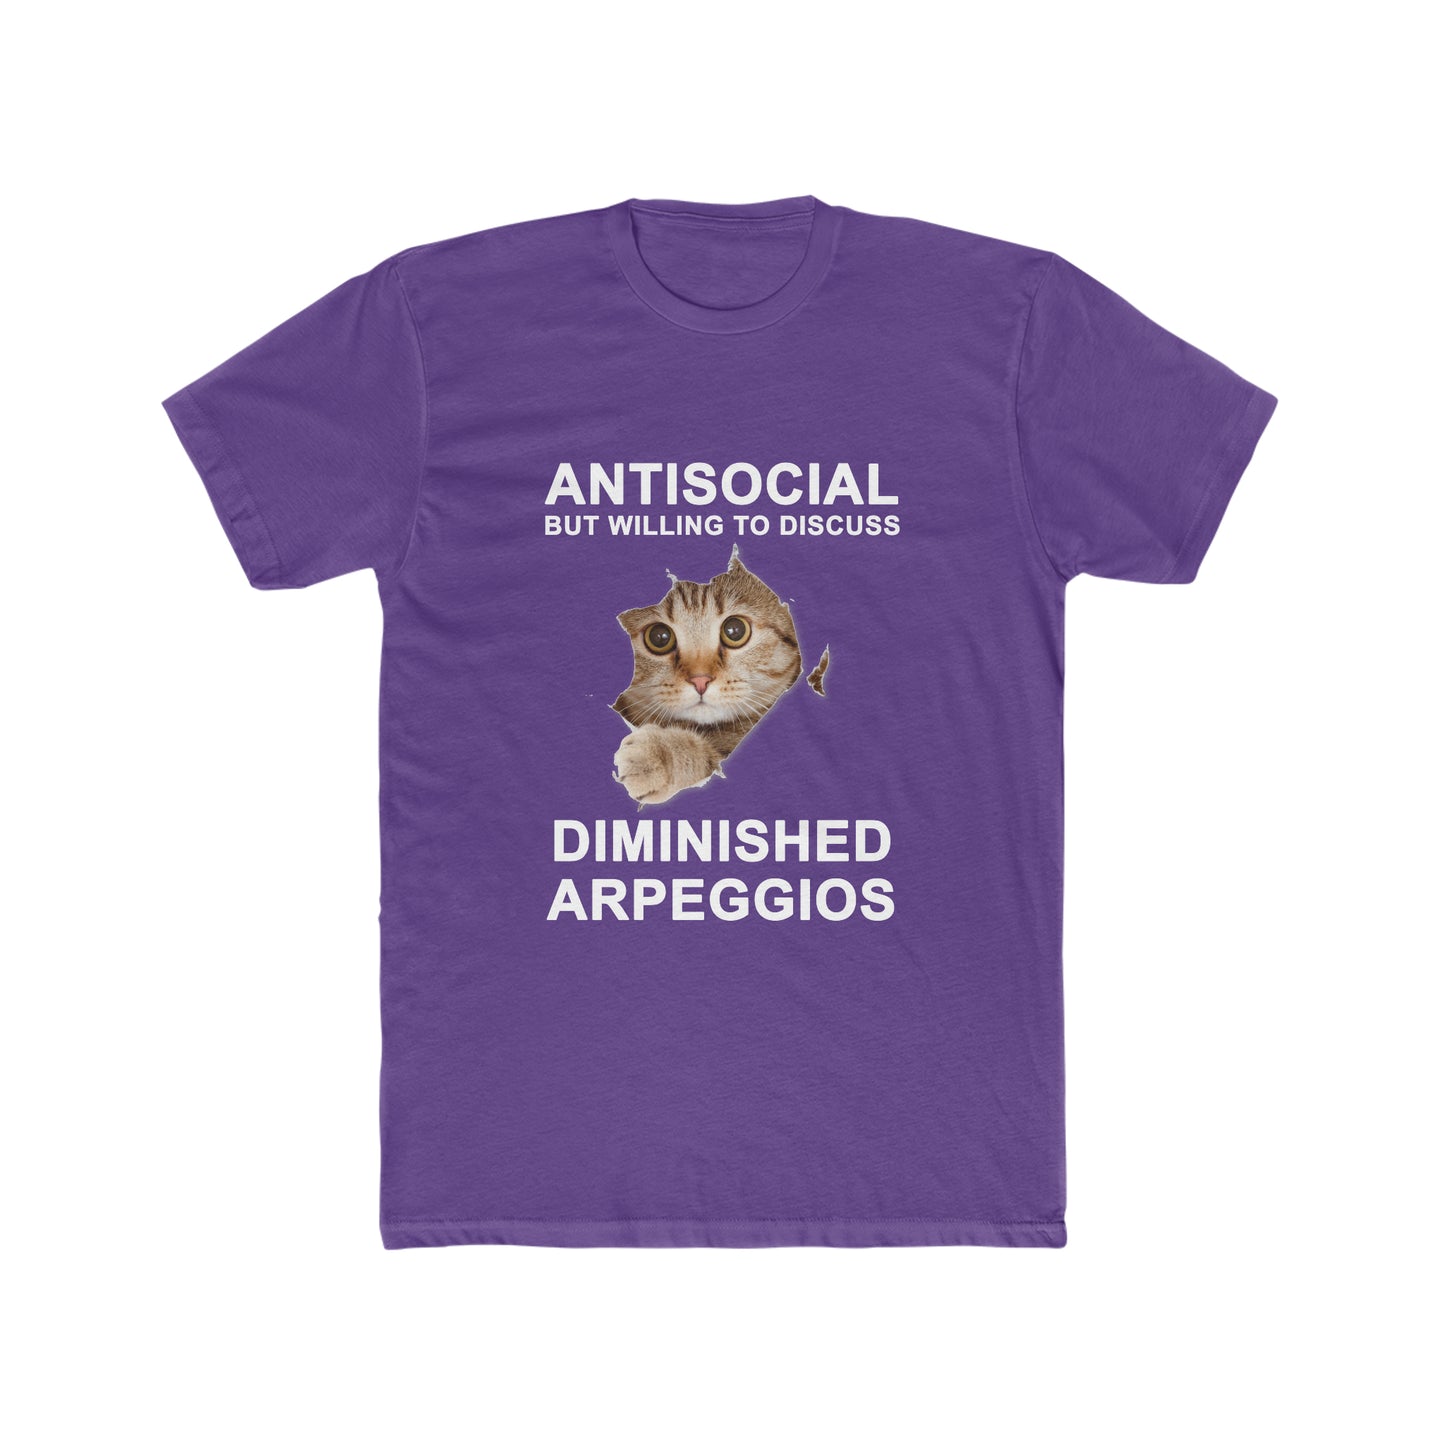 Shy Cat Diminished Arpeggios Shirt | Educational and Fun Wear for Guitarists | Practice Reminder Tee | Novelty Gifts for Music Teachers